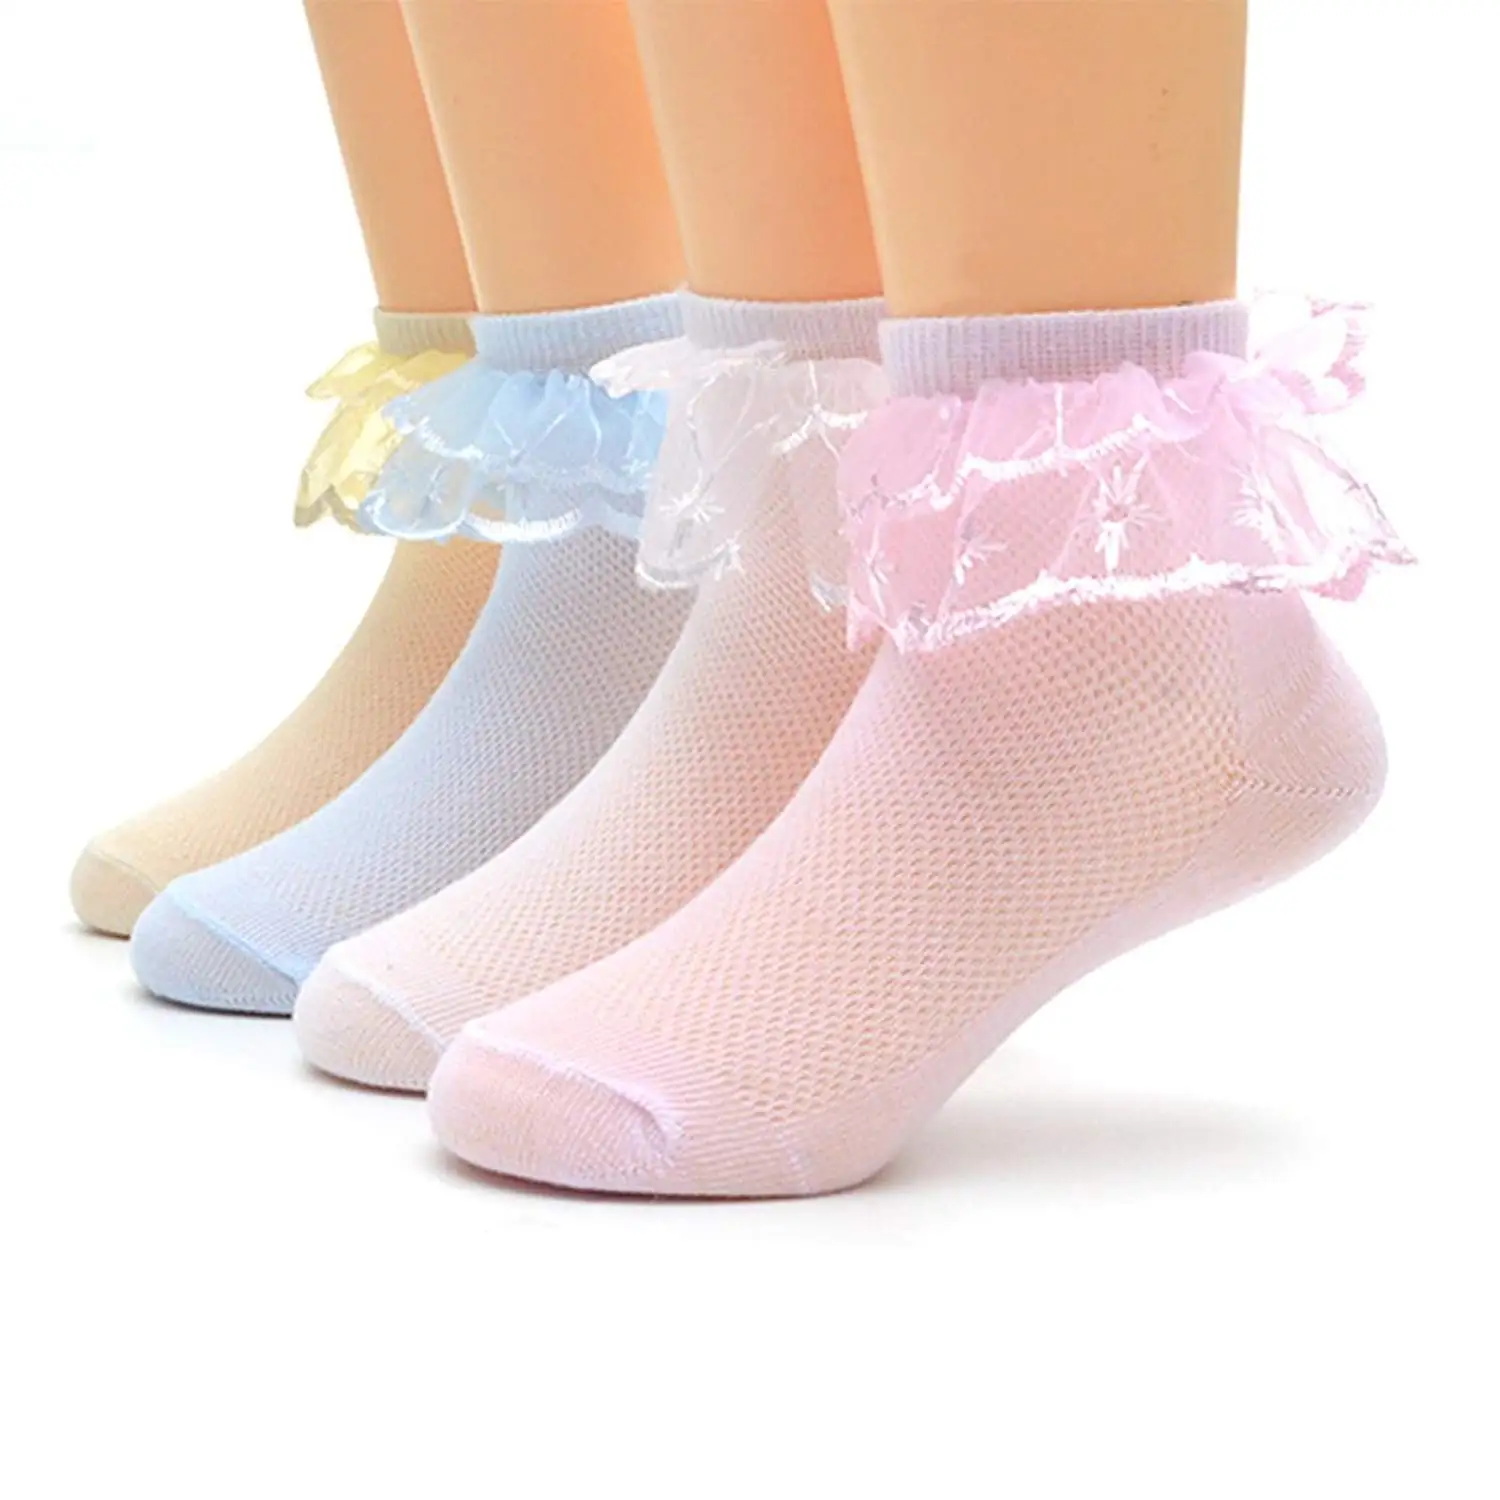 Cheap Lace Ankle Socks For Heels Find Lace Ankle Socks For Heels Deals 